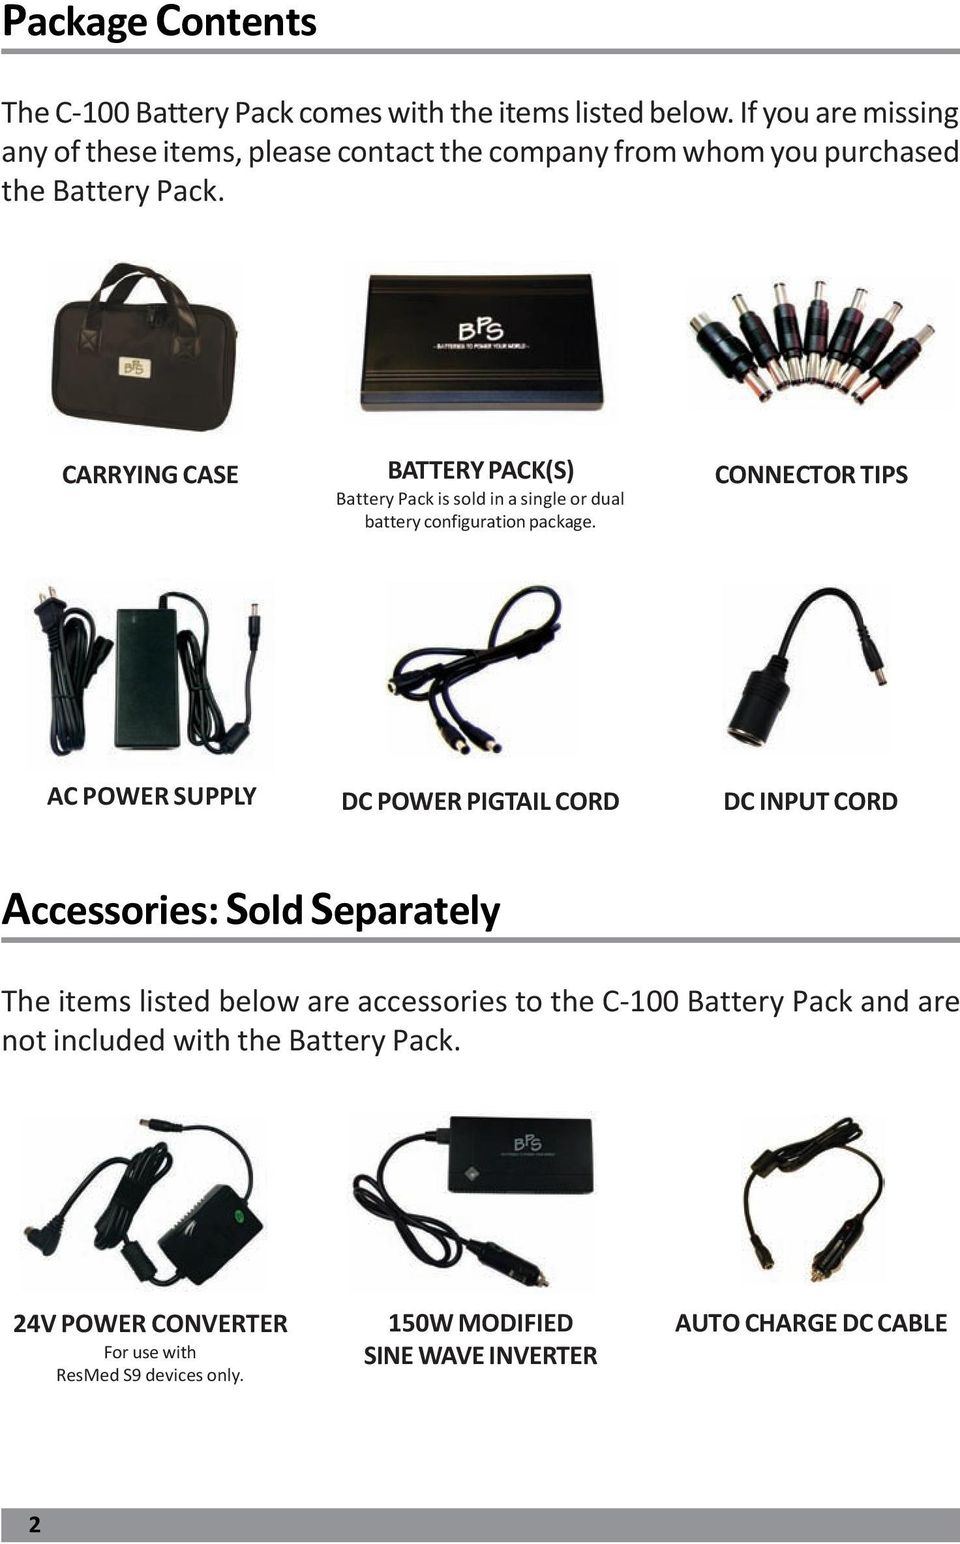 CARRYING CASE BATTERY PACK(S) Battery Pack is sold in a single or dual battery configuration package.